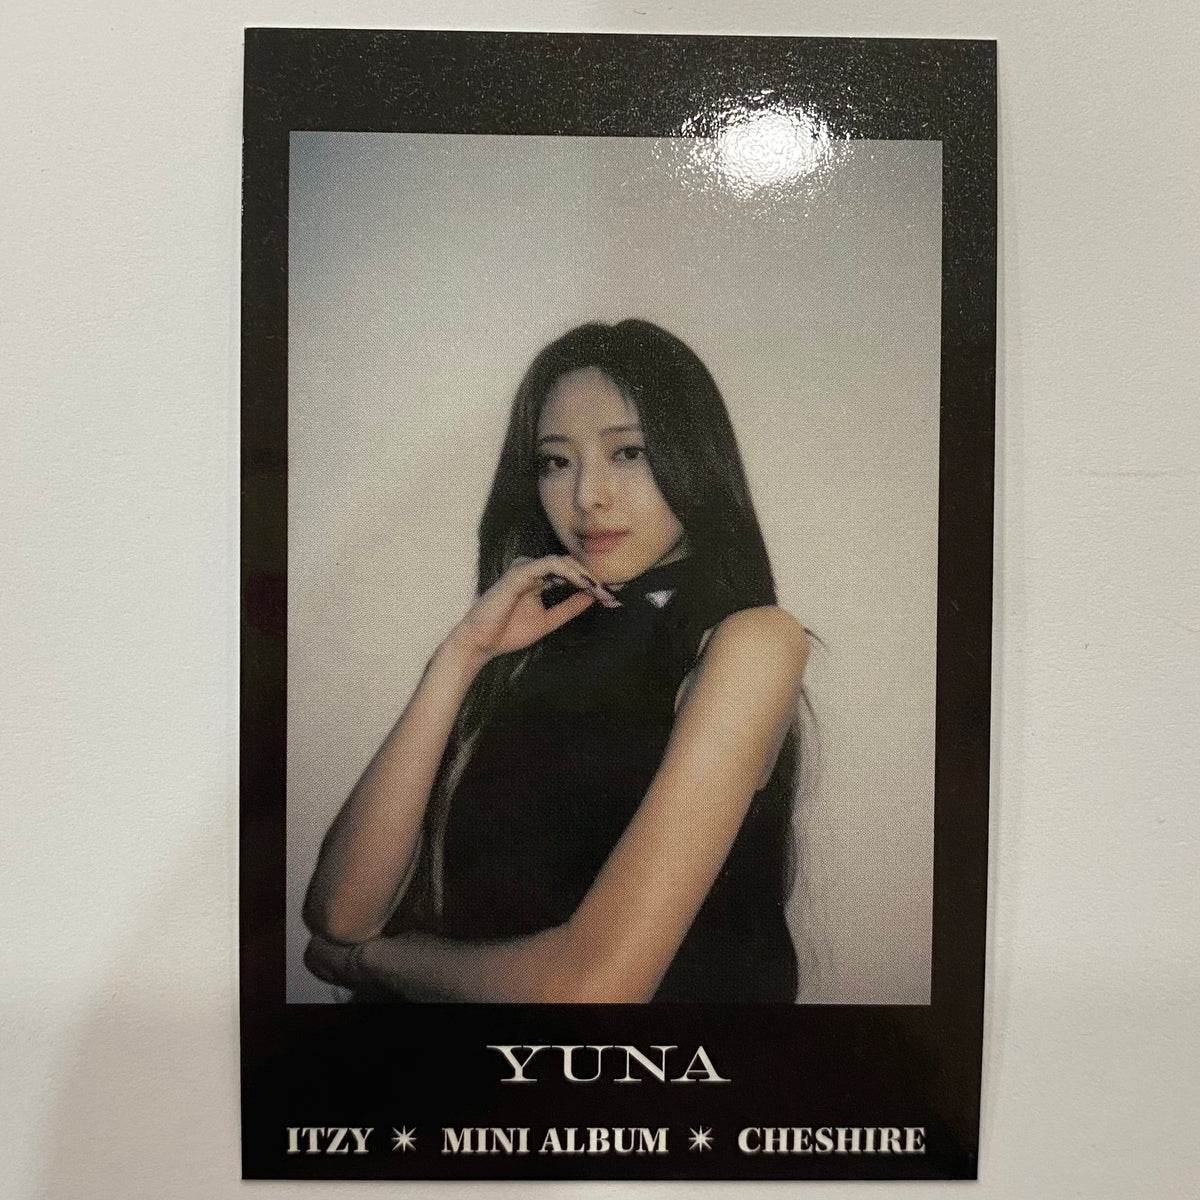 ITZY - Cheshire Soundwave Preorder Photocards – K Stars